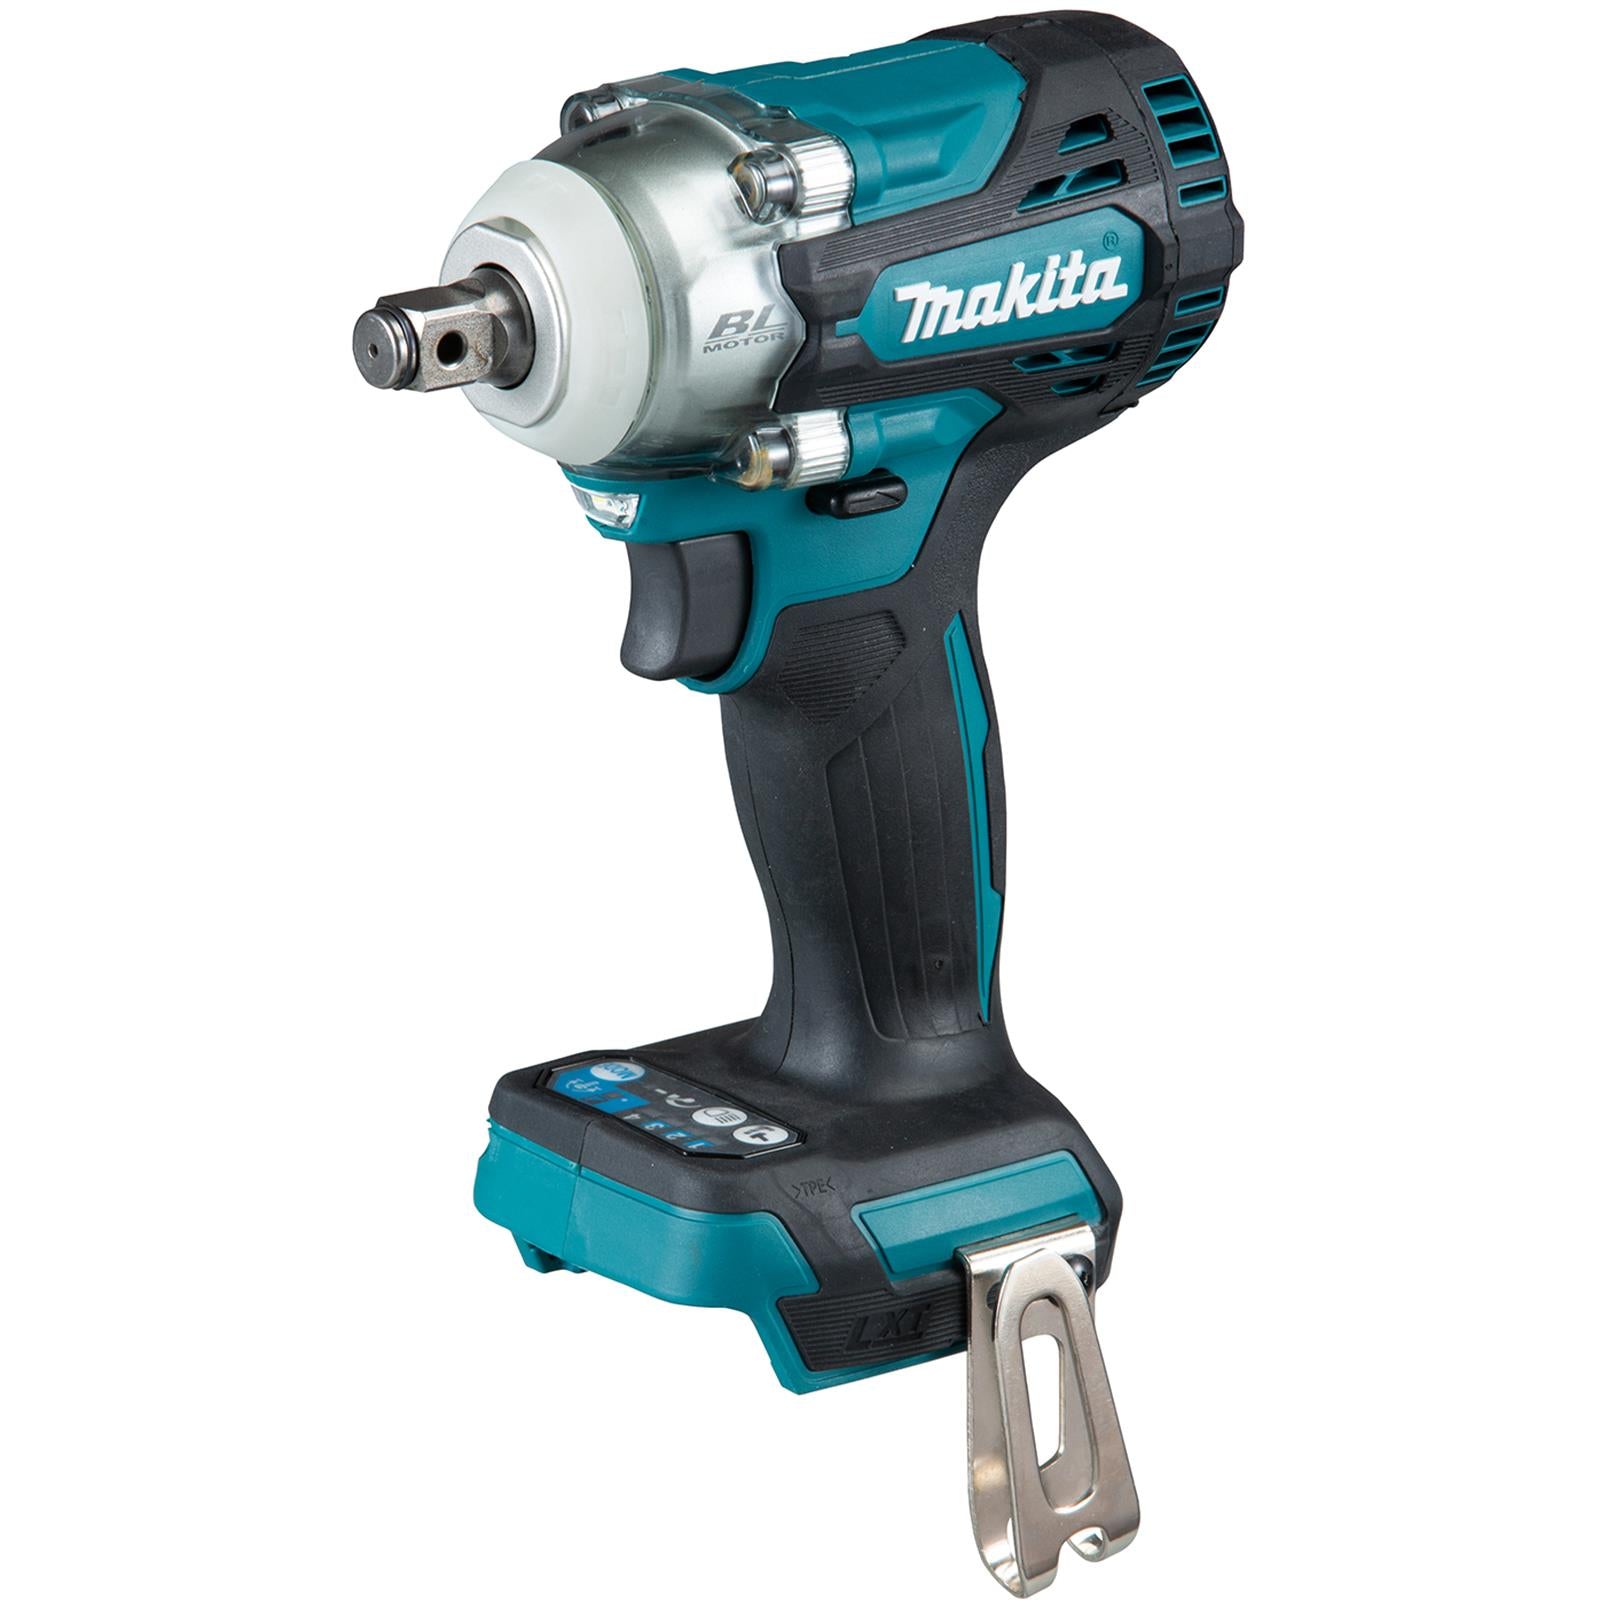 Makita Impact Wrench 1/2" Drive 18V LXT Brushless Li-ion Cordless Body Only DTW300Z